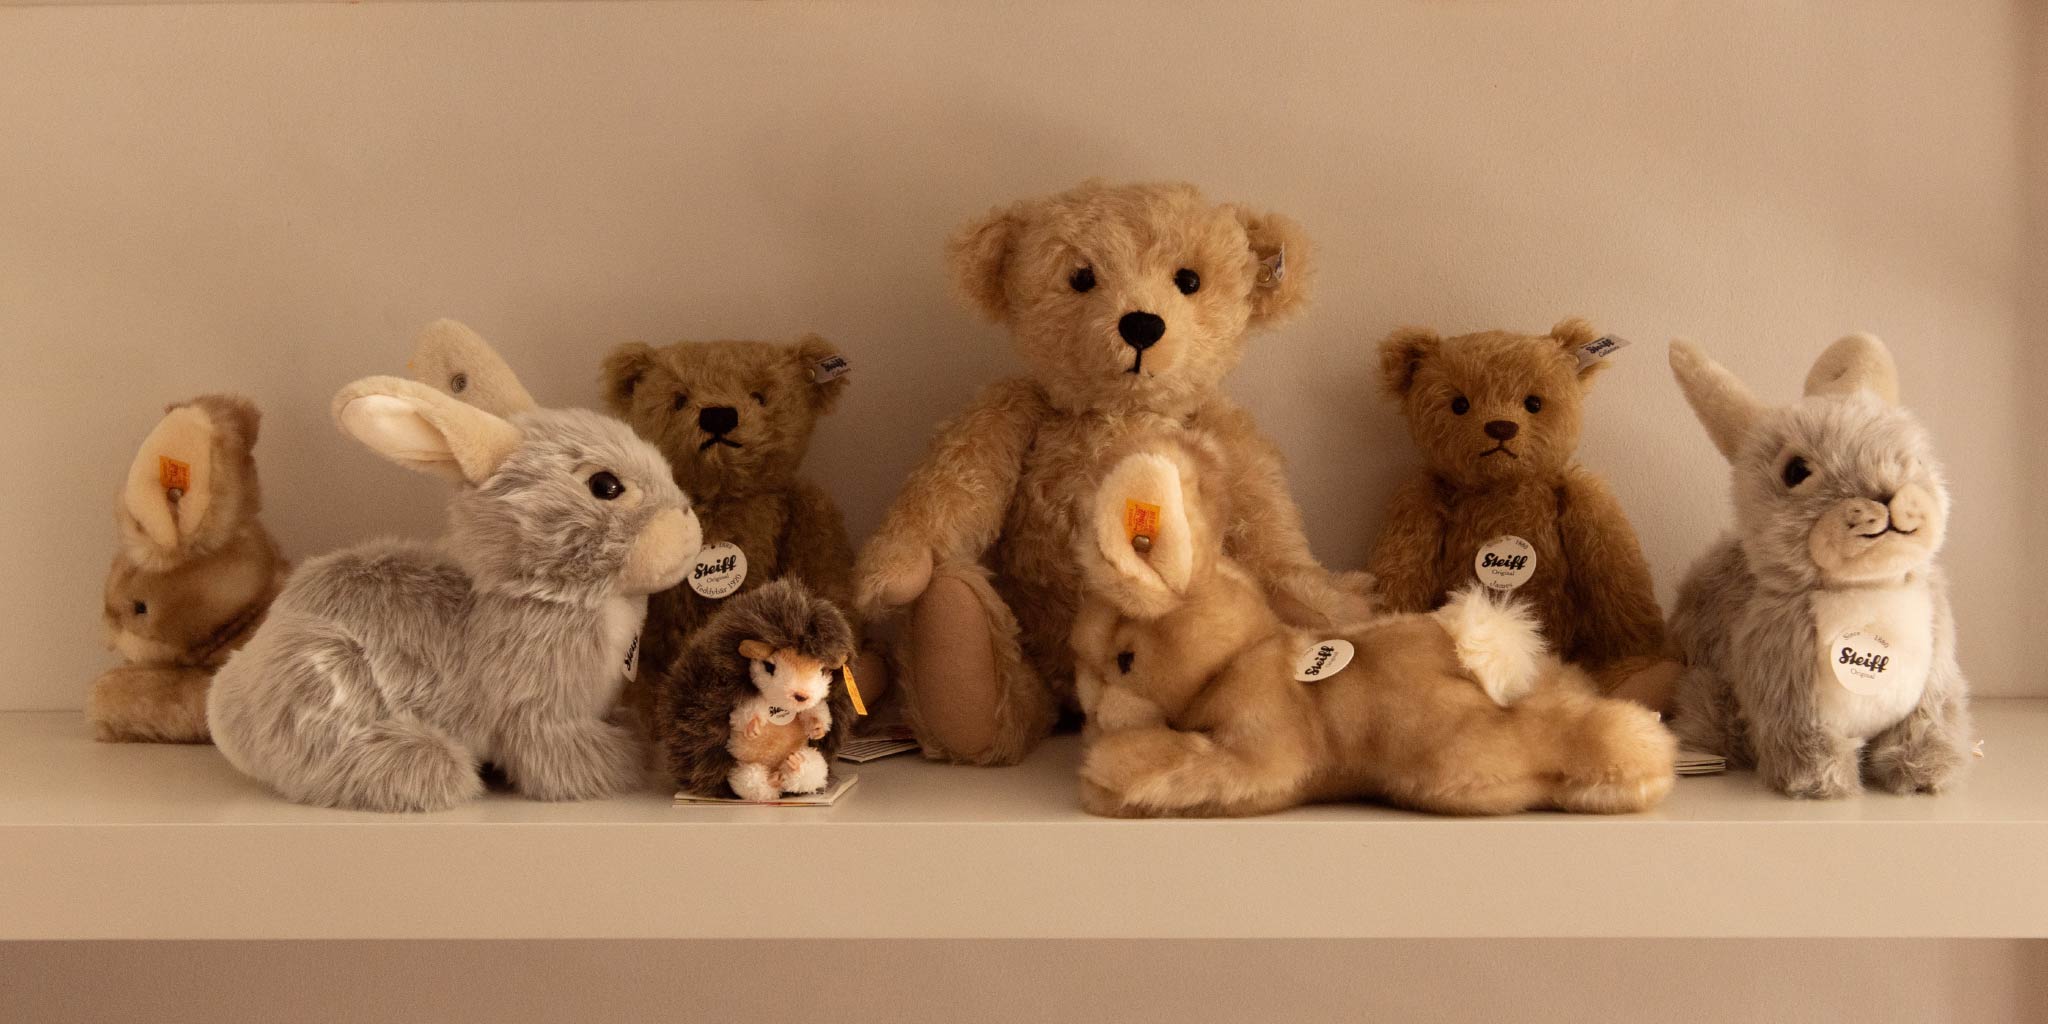 soft toys and stuffed animals